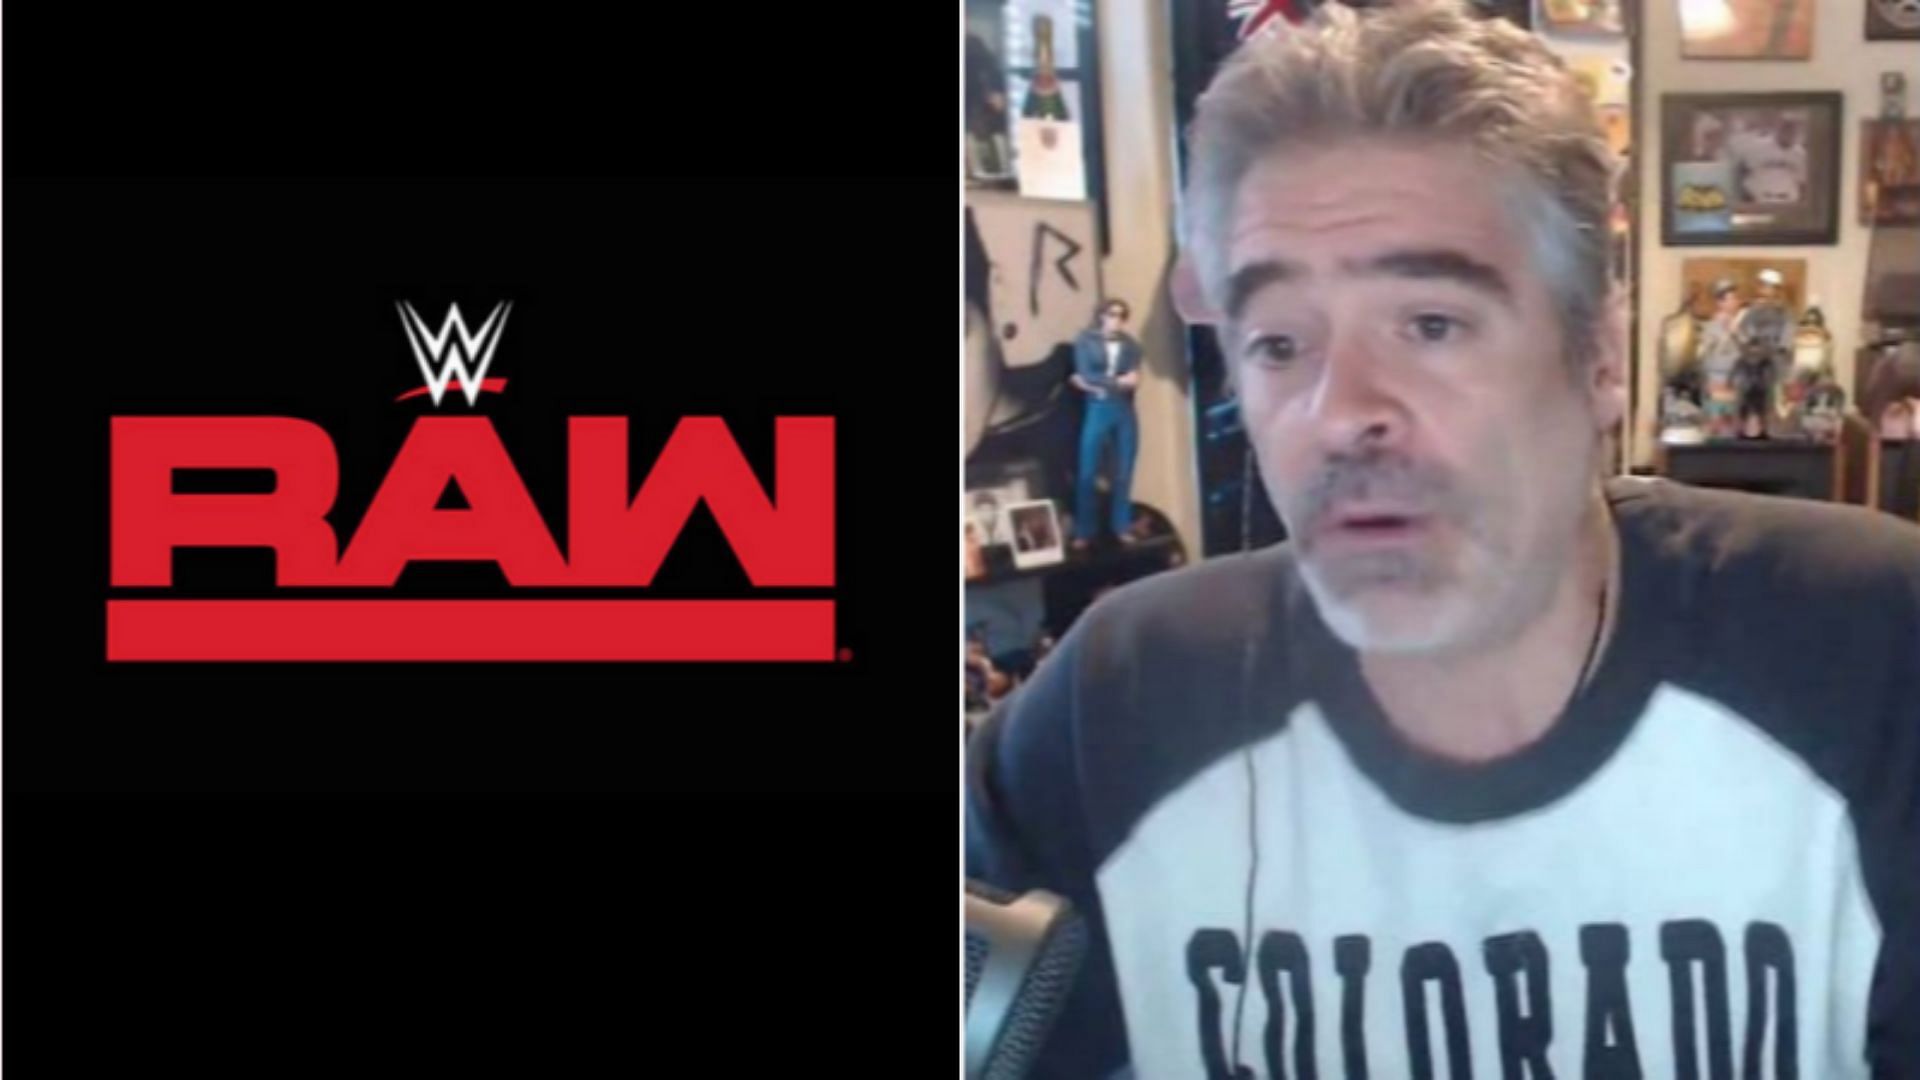 Vince Russo worked as the head writer of RAW in the late 1990s